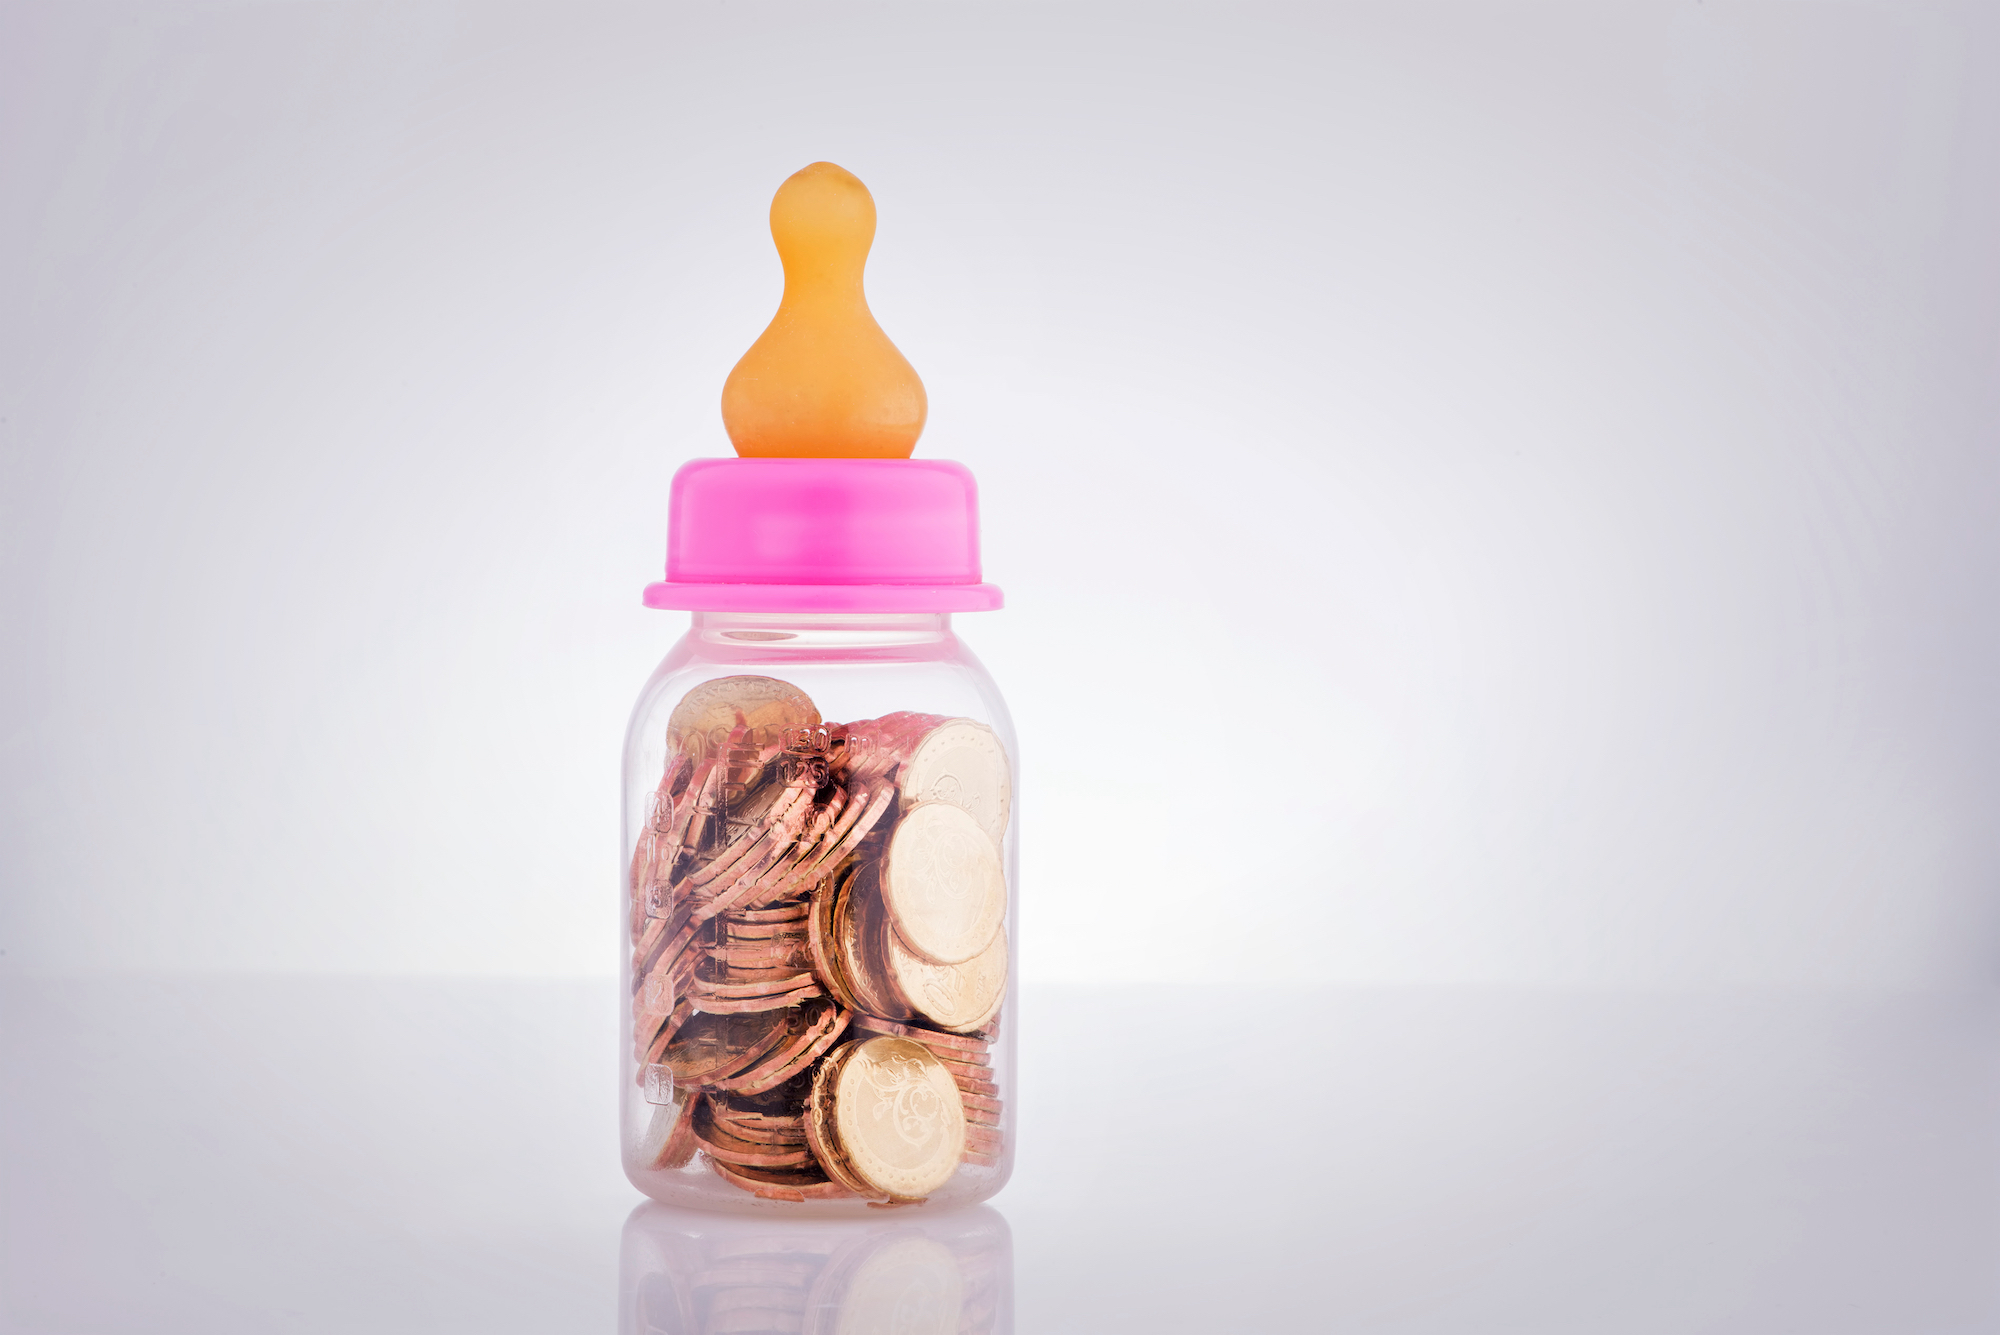 A baby bottle filled with coins on a white background